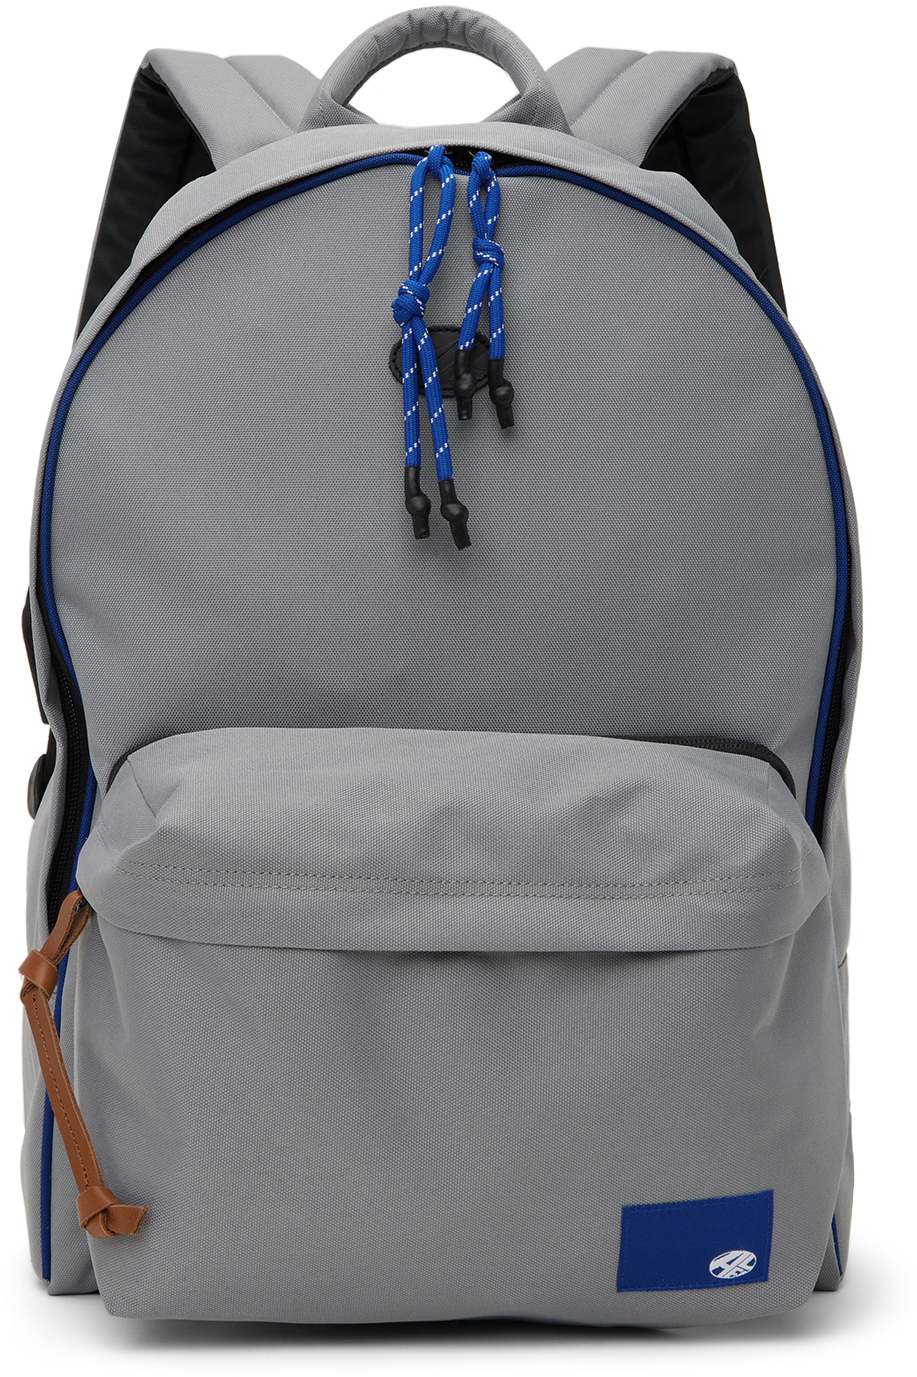 Grey Reover Backpack